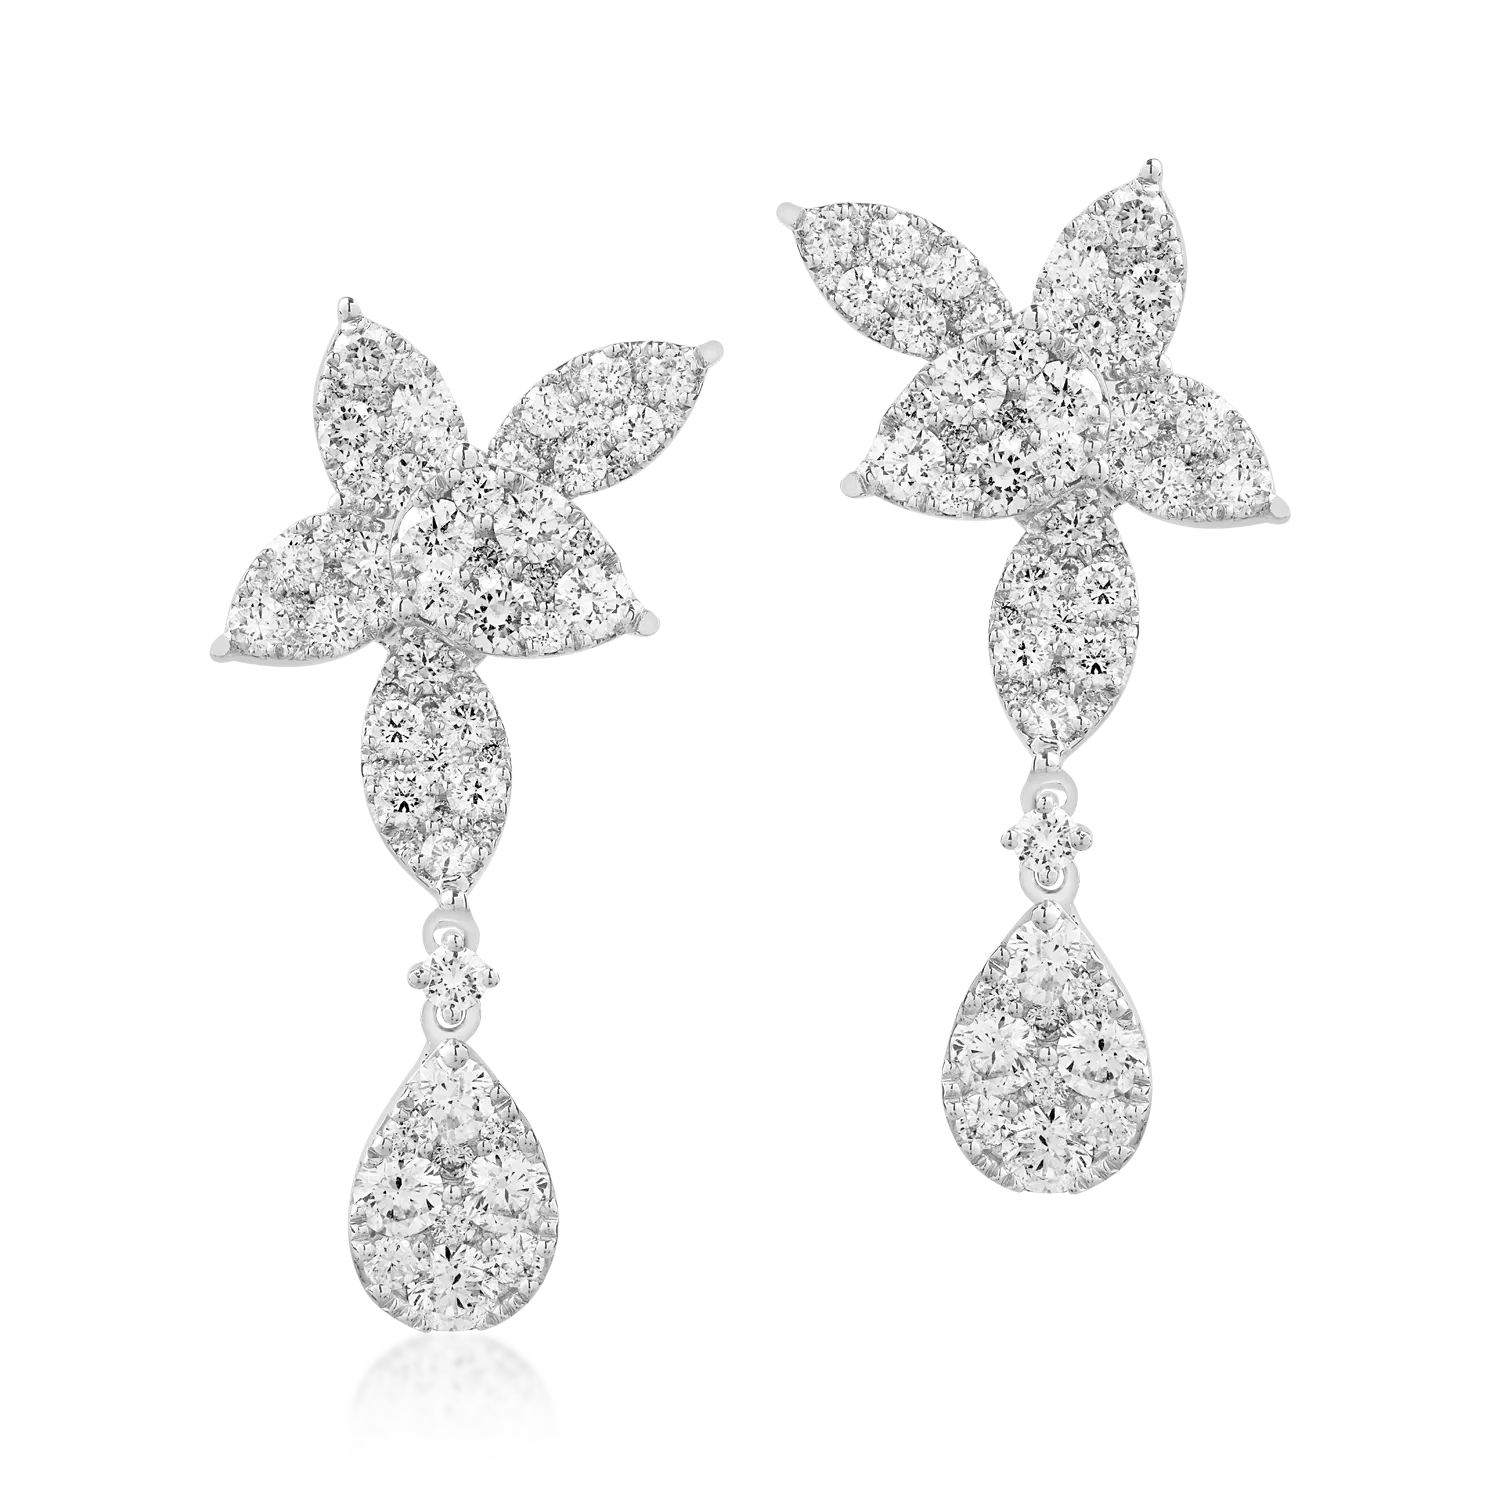 18K white gold earrings with 2.79ct diamonds